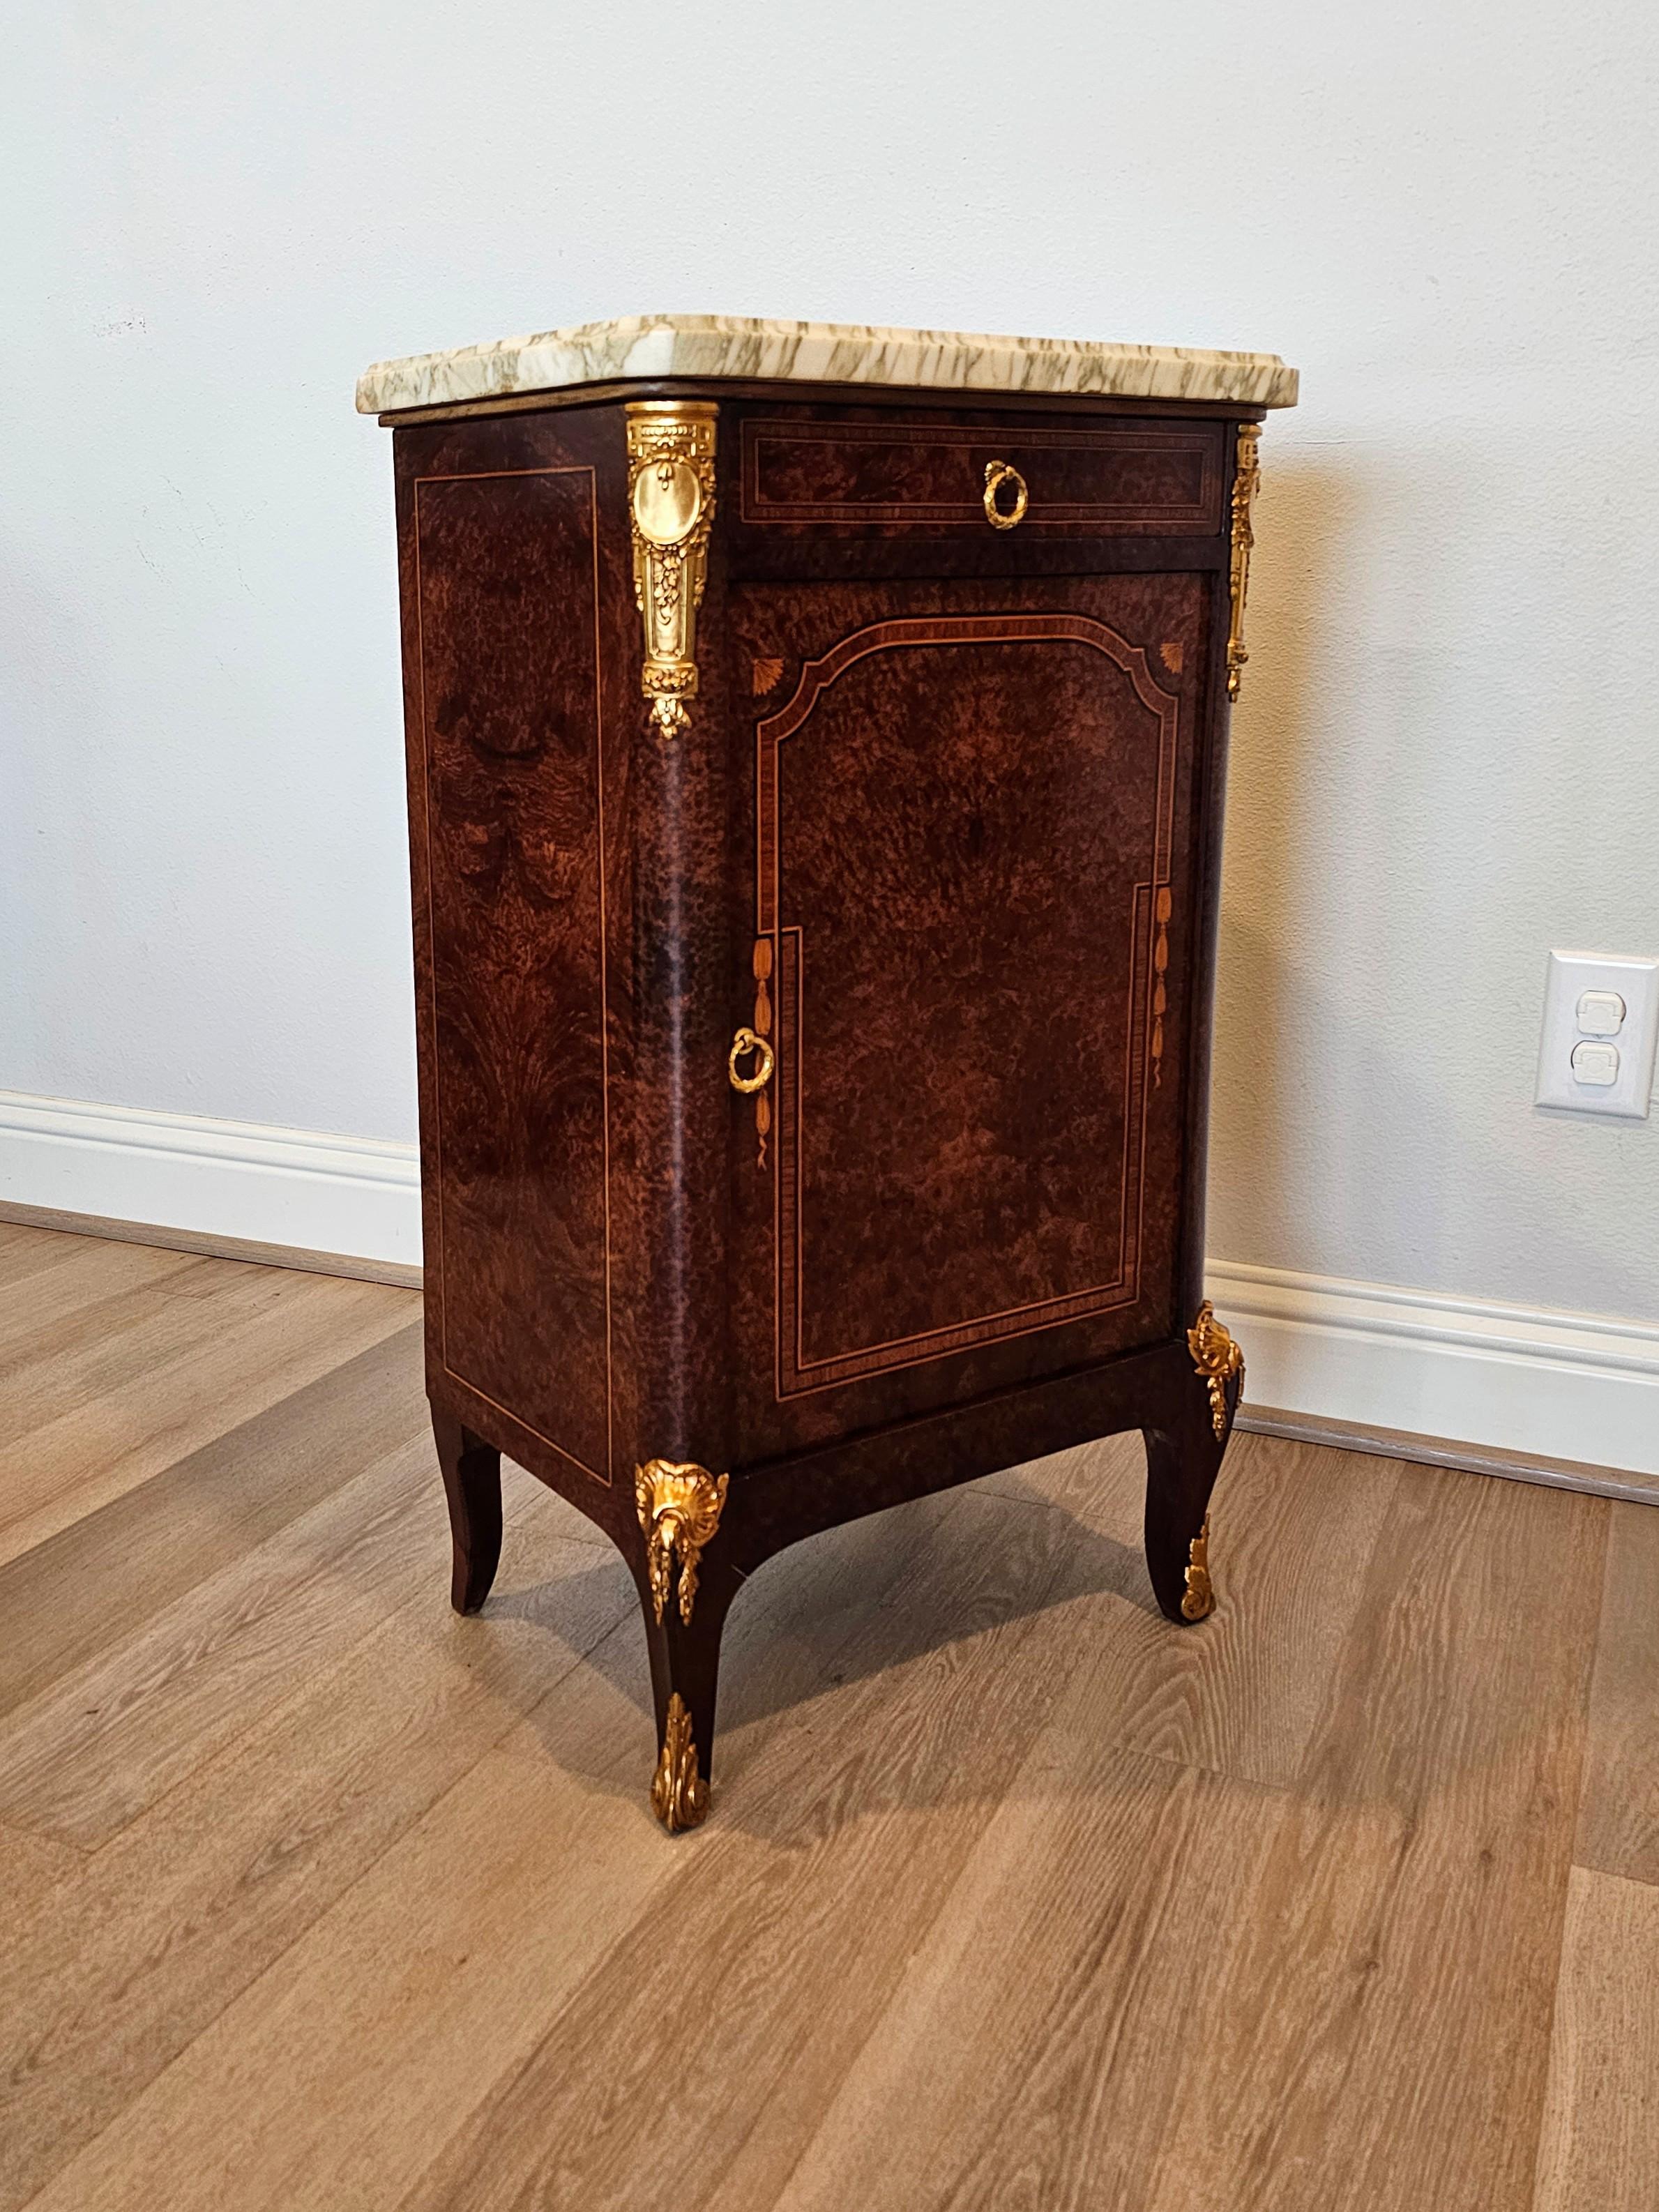 A stunning fine quality antique French Transitional Louis XV - XVI style exotic Amboyna burlwood marble-top bedside cabinet. circa 1920

Born in France in the early 20th century, fine quality Parisian craftsmanship, exceptionally executed in